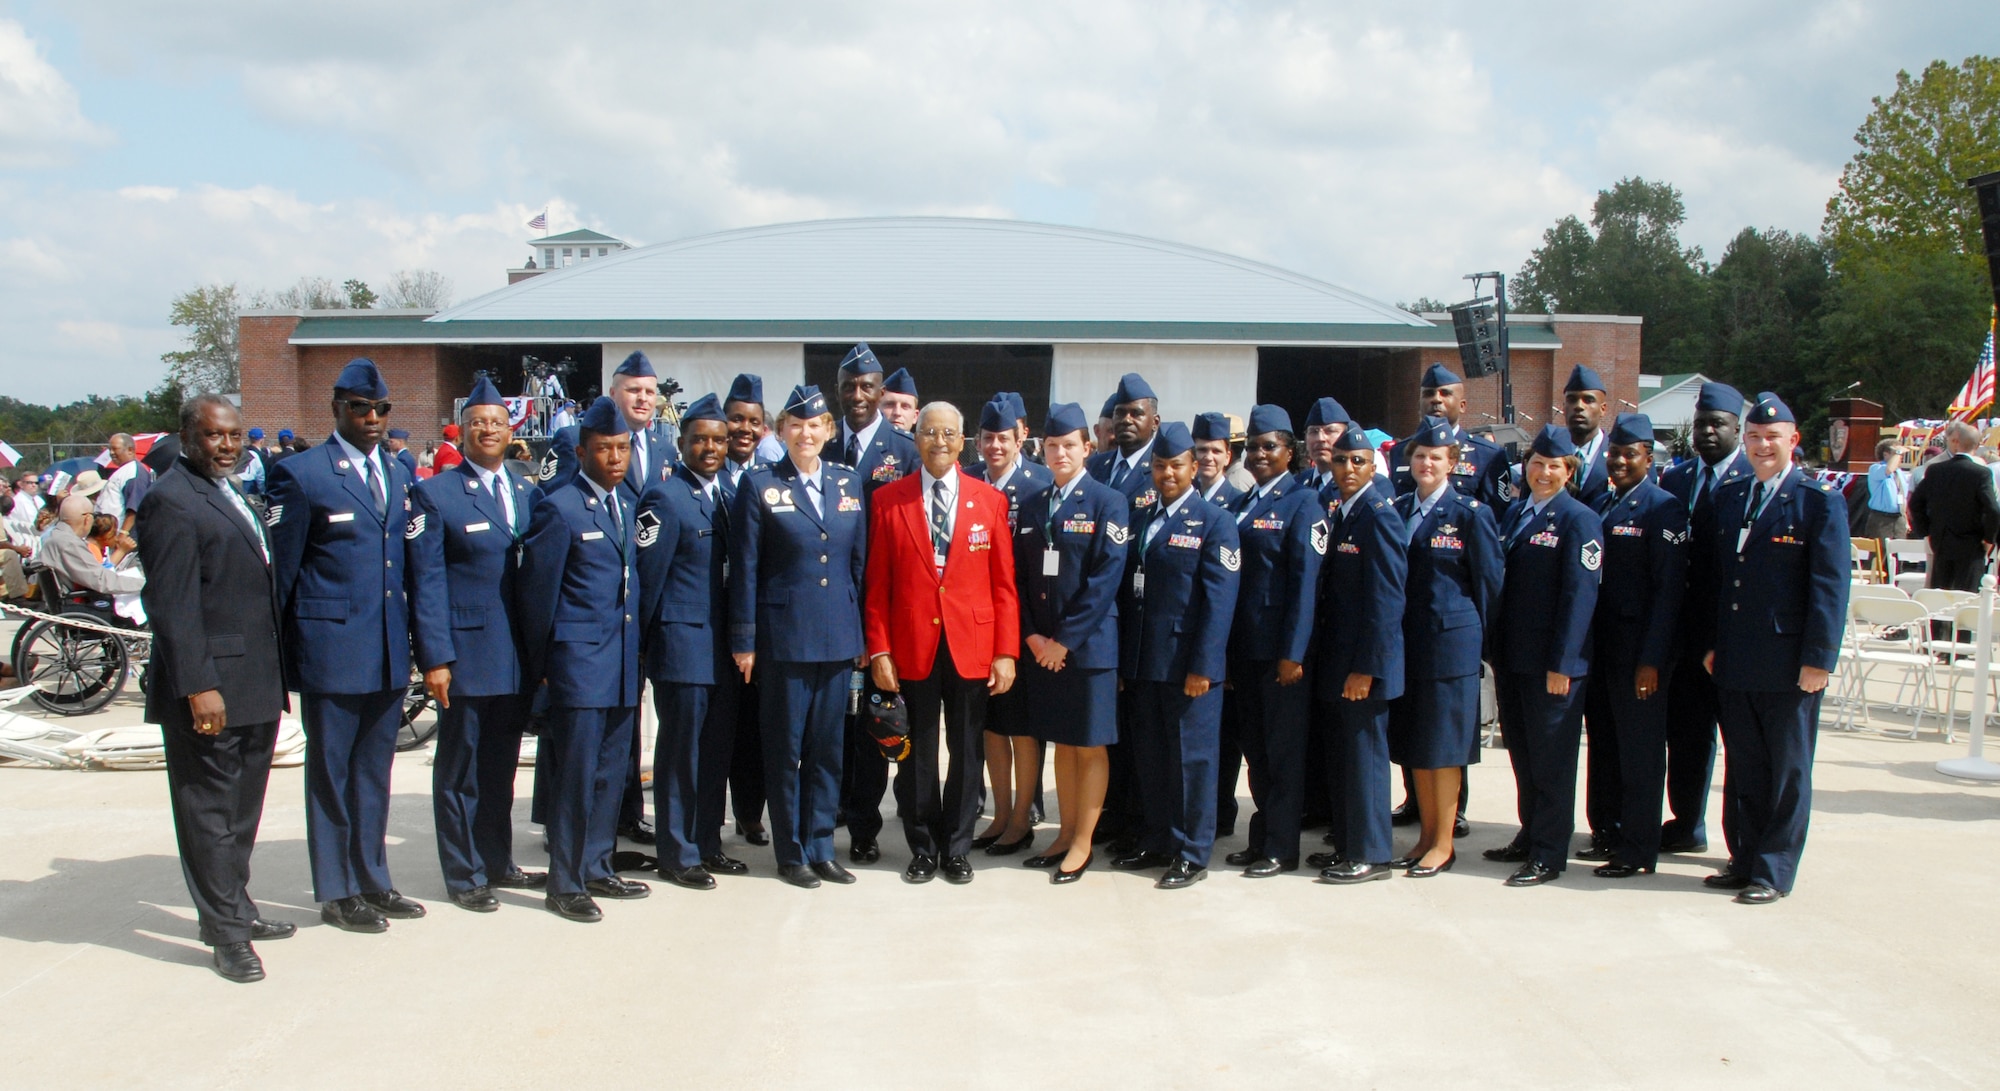 Maj. Gens. Linda S. Hemminger and Harold L. "Mitch" Mitchell along with 908th Airlift Wing members including former 908th AW Command Chief Amos Moore pose for a keepsake photo with original Tuskegee Airman retired Col. Charles McGee.  Colonel McGee has the distinction of being the Air Force's record-holder for the highest number of combat missions flown in three wars. General Hemminger is the mobilization assistant to the Air Force deputy surgeon general; General Mitchell is mobilization assistant to the commander, U.S. Transportation Command. (U.S. Air Force Photo by Lt. Col. Jerry Lobb)         